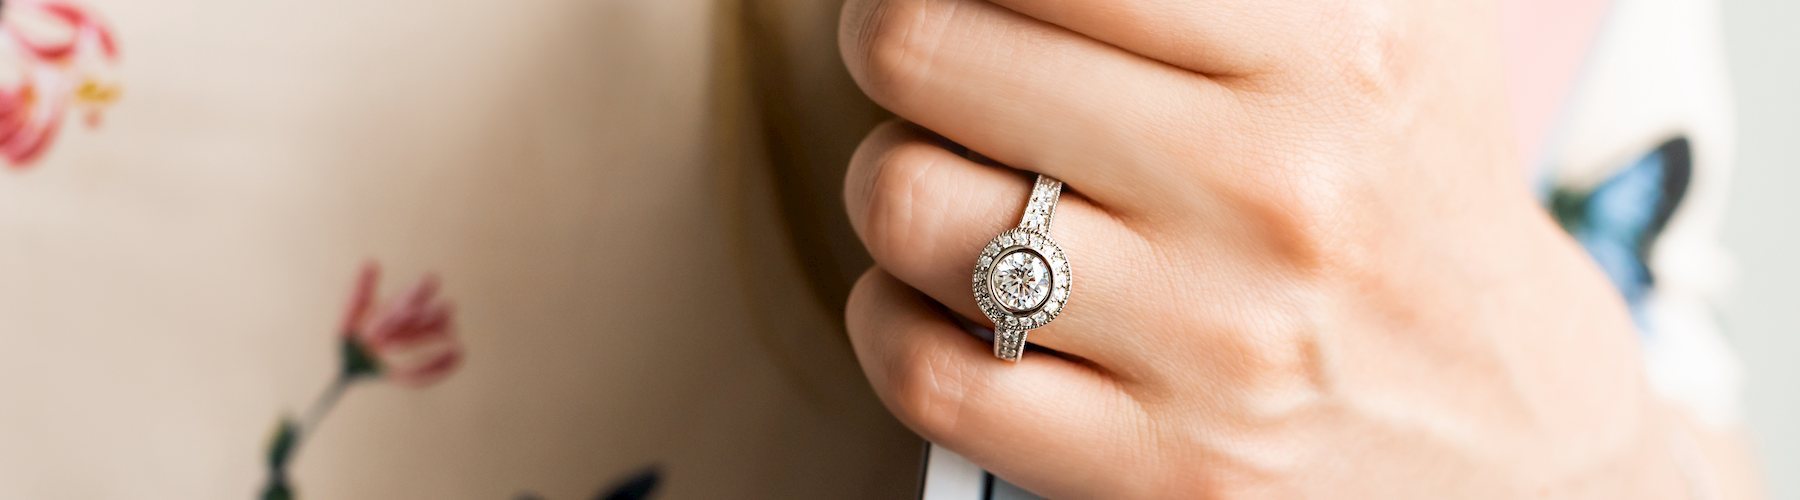 4 Reasons Women are Buying Their Own Diamond Rings